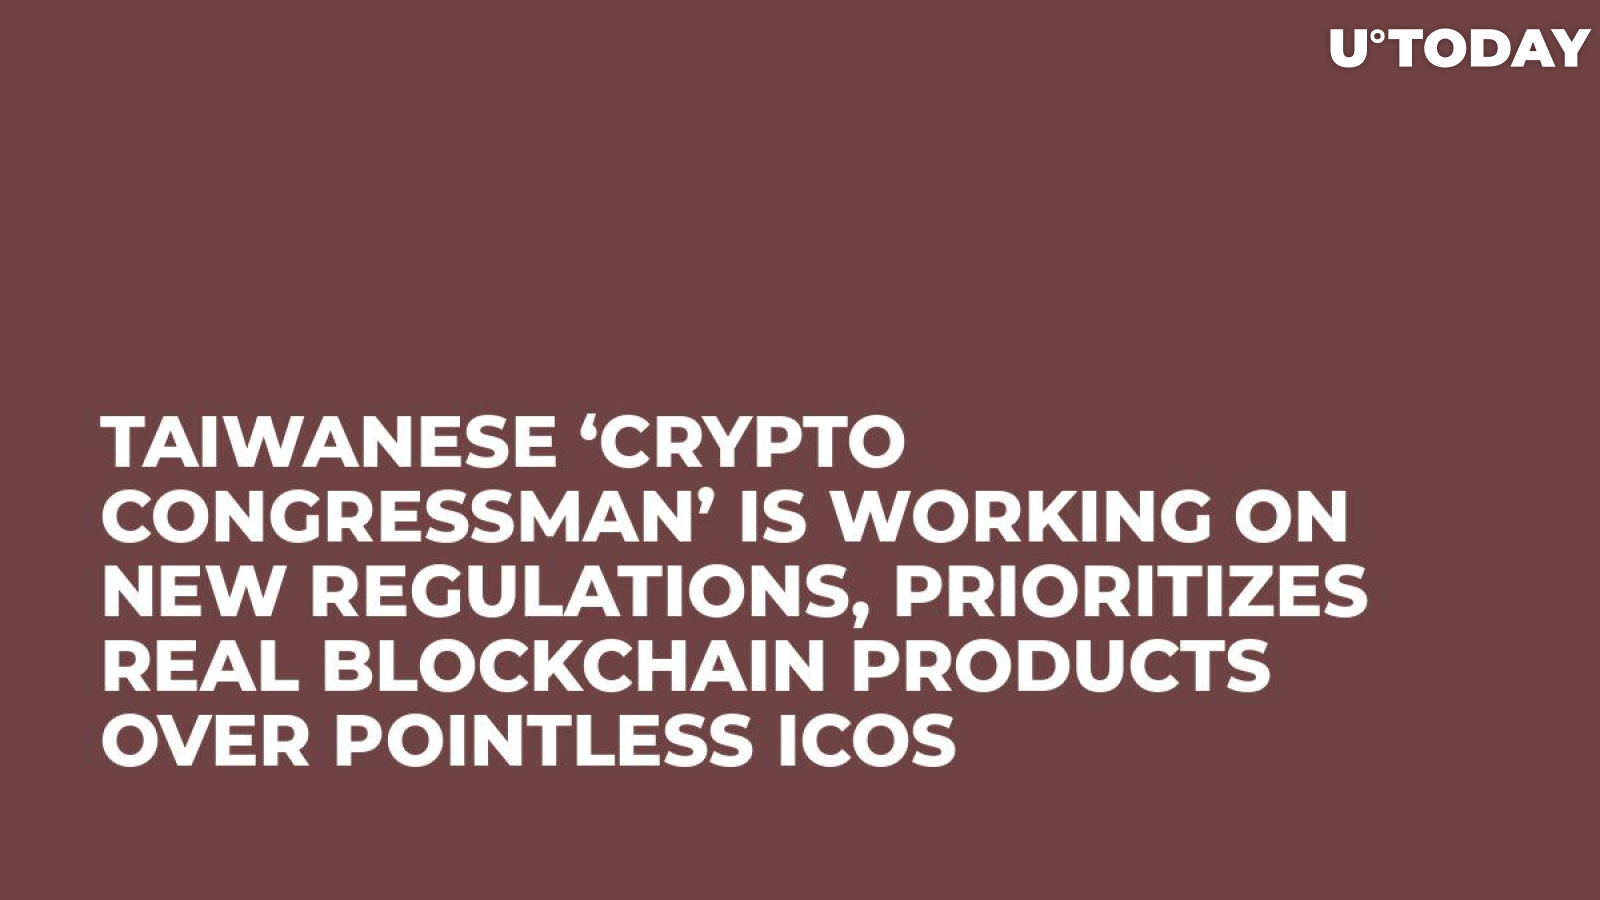 Taiwanese ‘Crypto Congressman’ Is Working on New Regulations, Prioritizes Real Blockchain Products Over Pointless ICOs